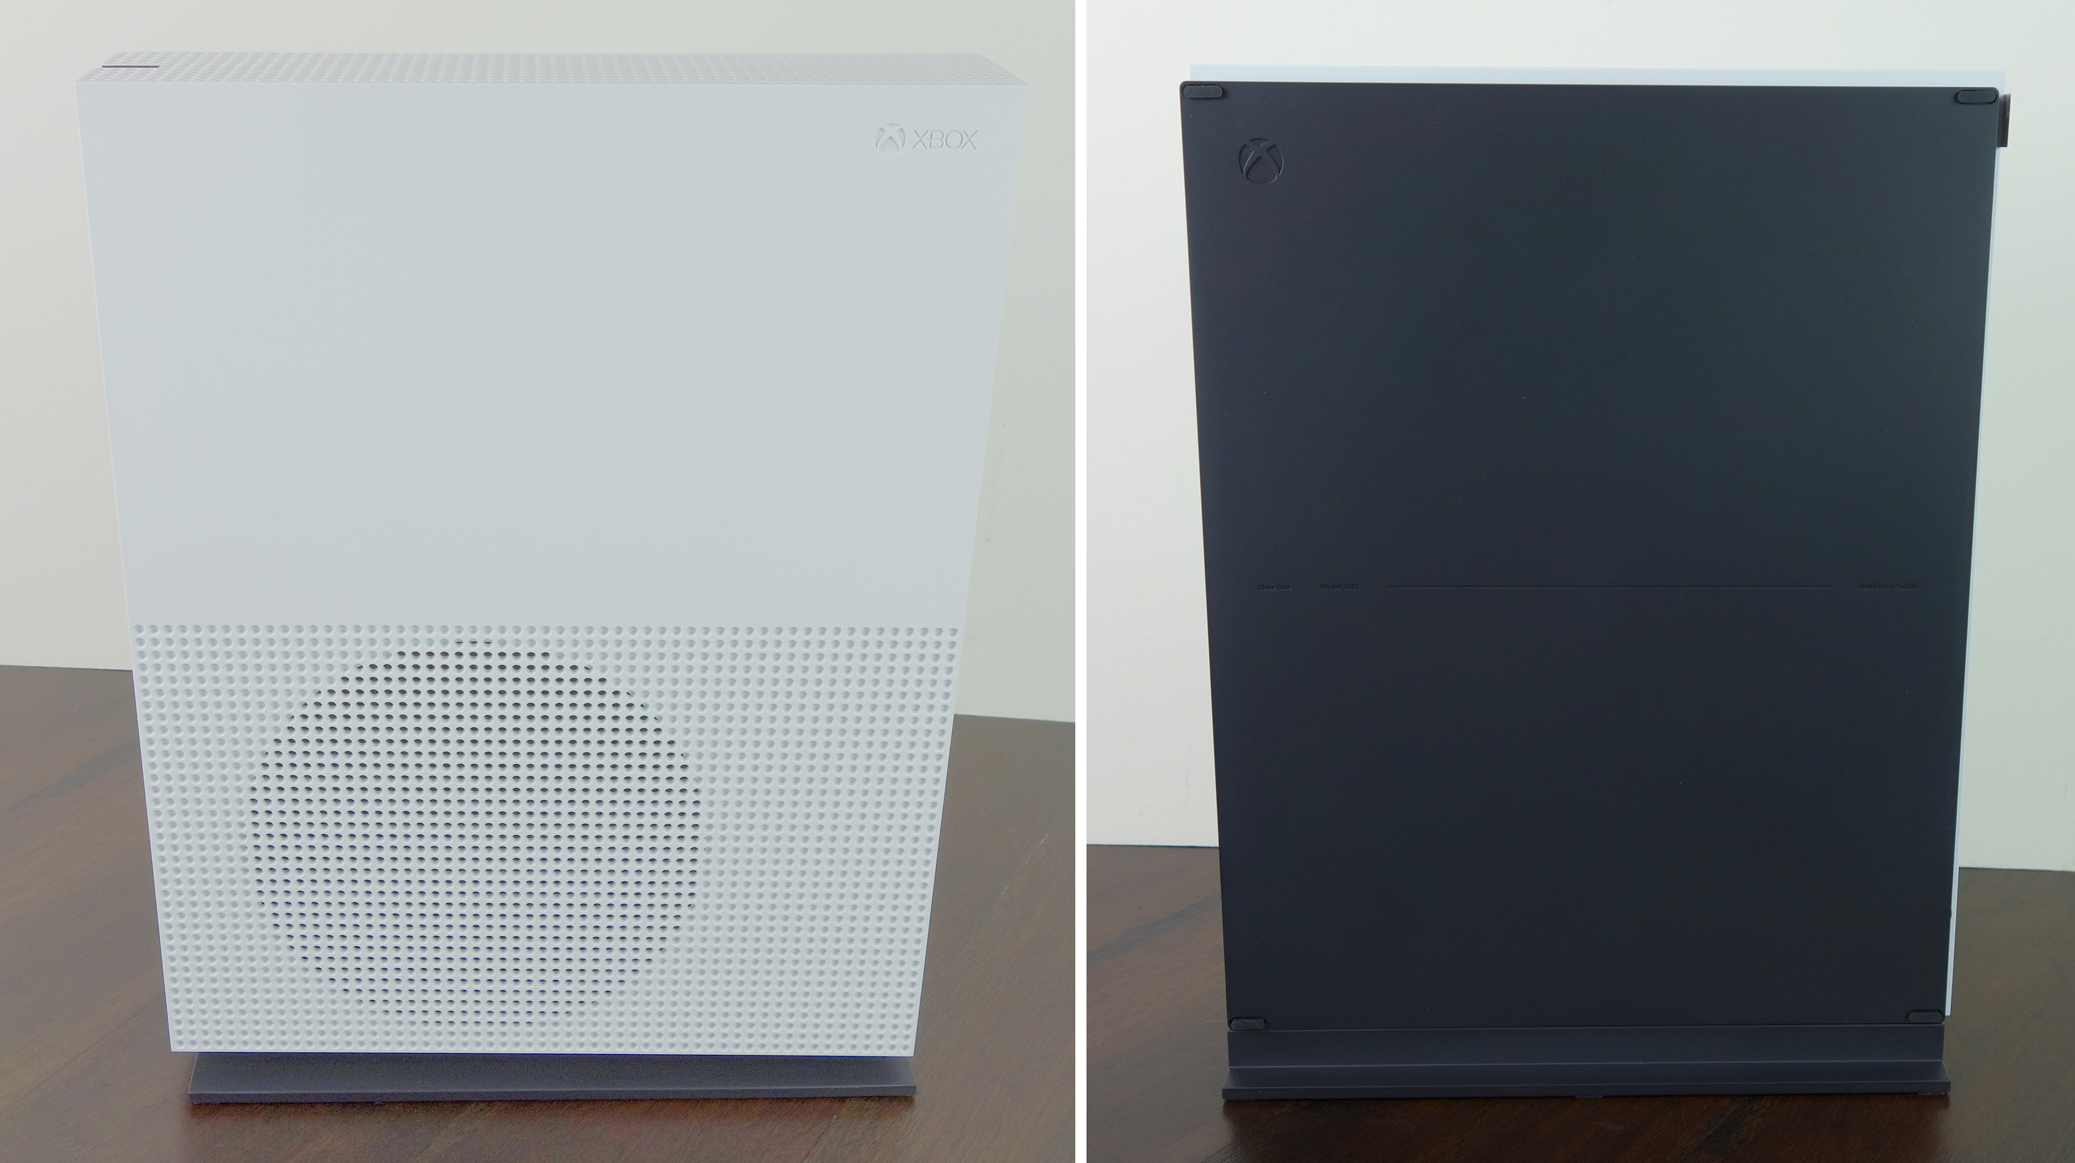 Xbox One S vertical sides real